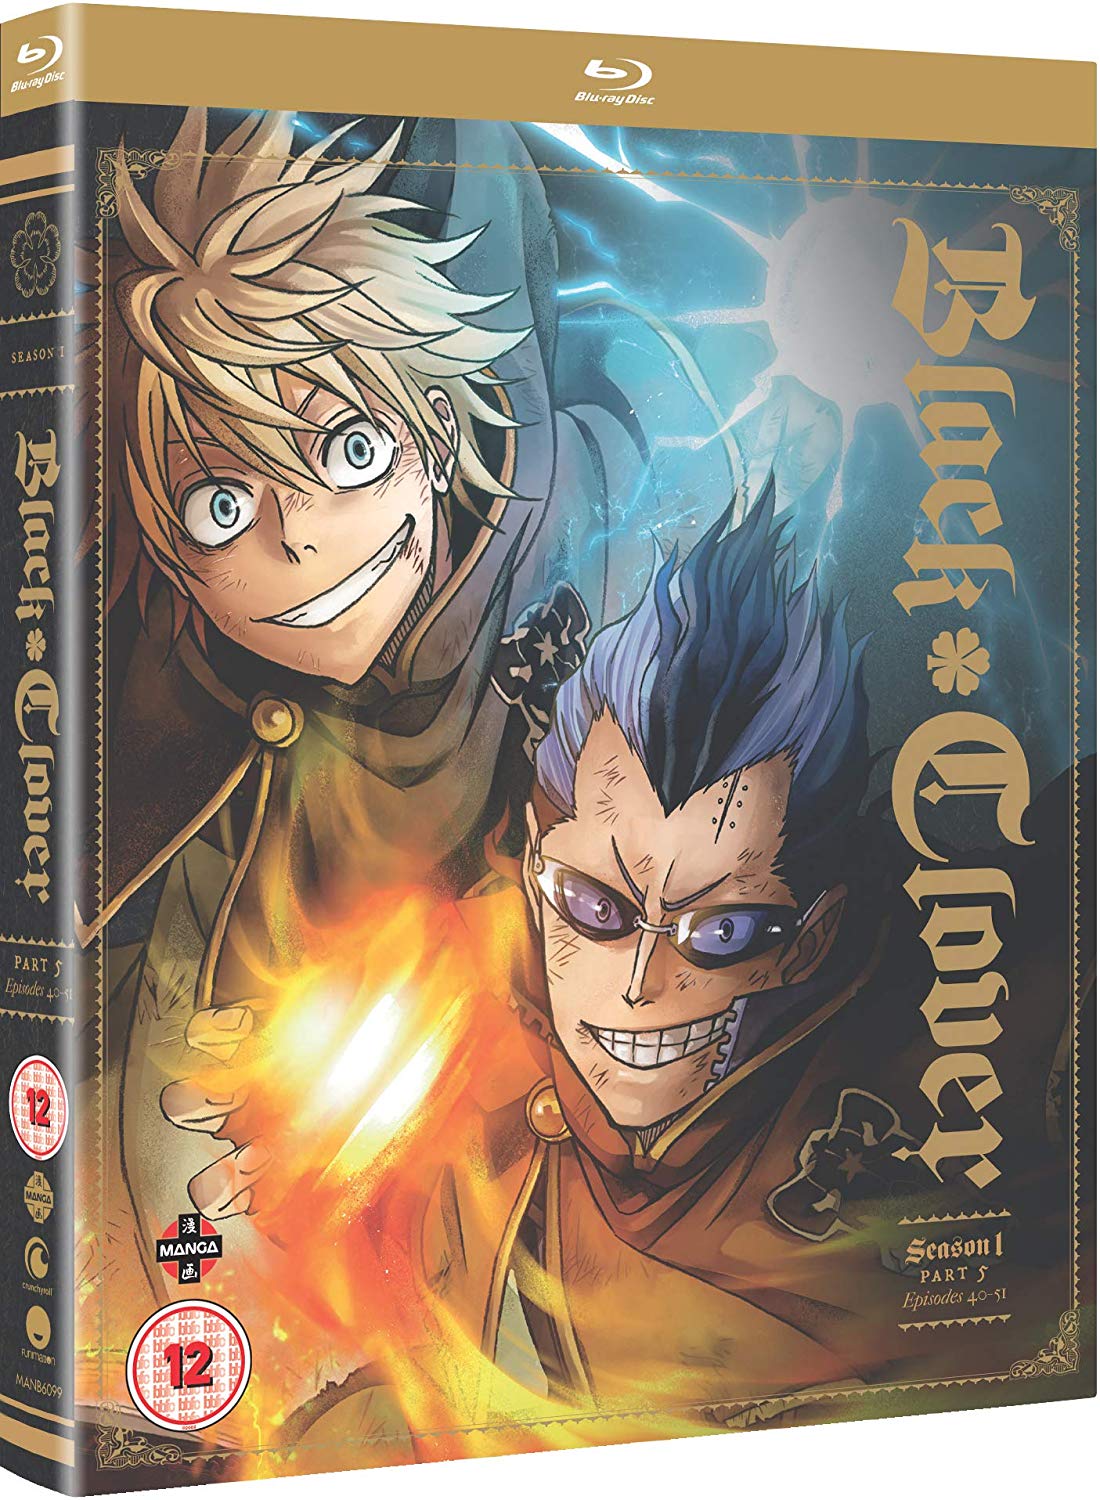 3 MORE DAYS!!! MAKE SURE TO WATCH TF OUT OF THIS SO WE GET THE ANIME BACK  ASAP : r/BlackClover